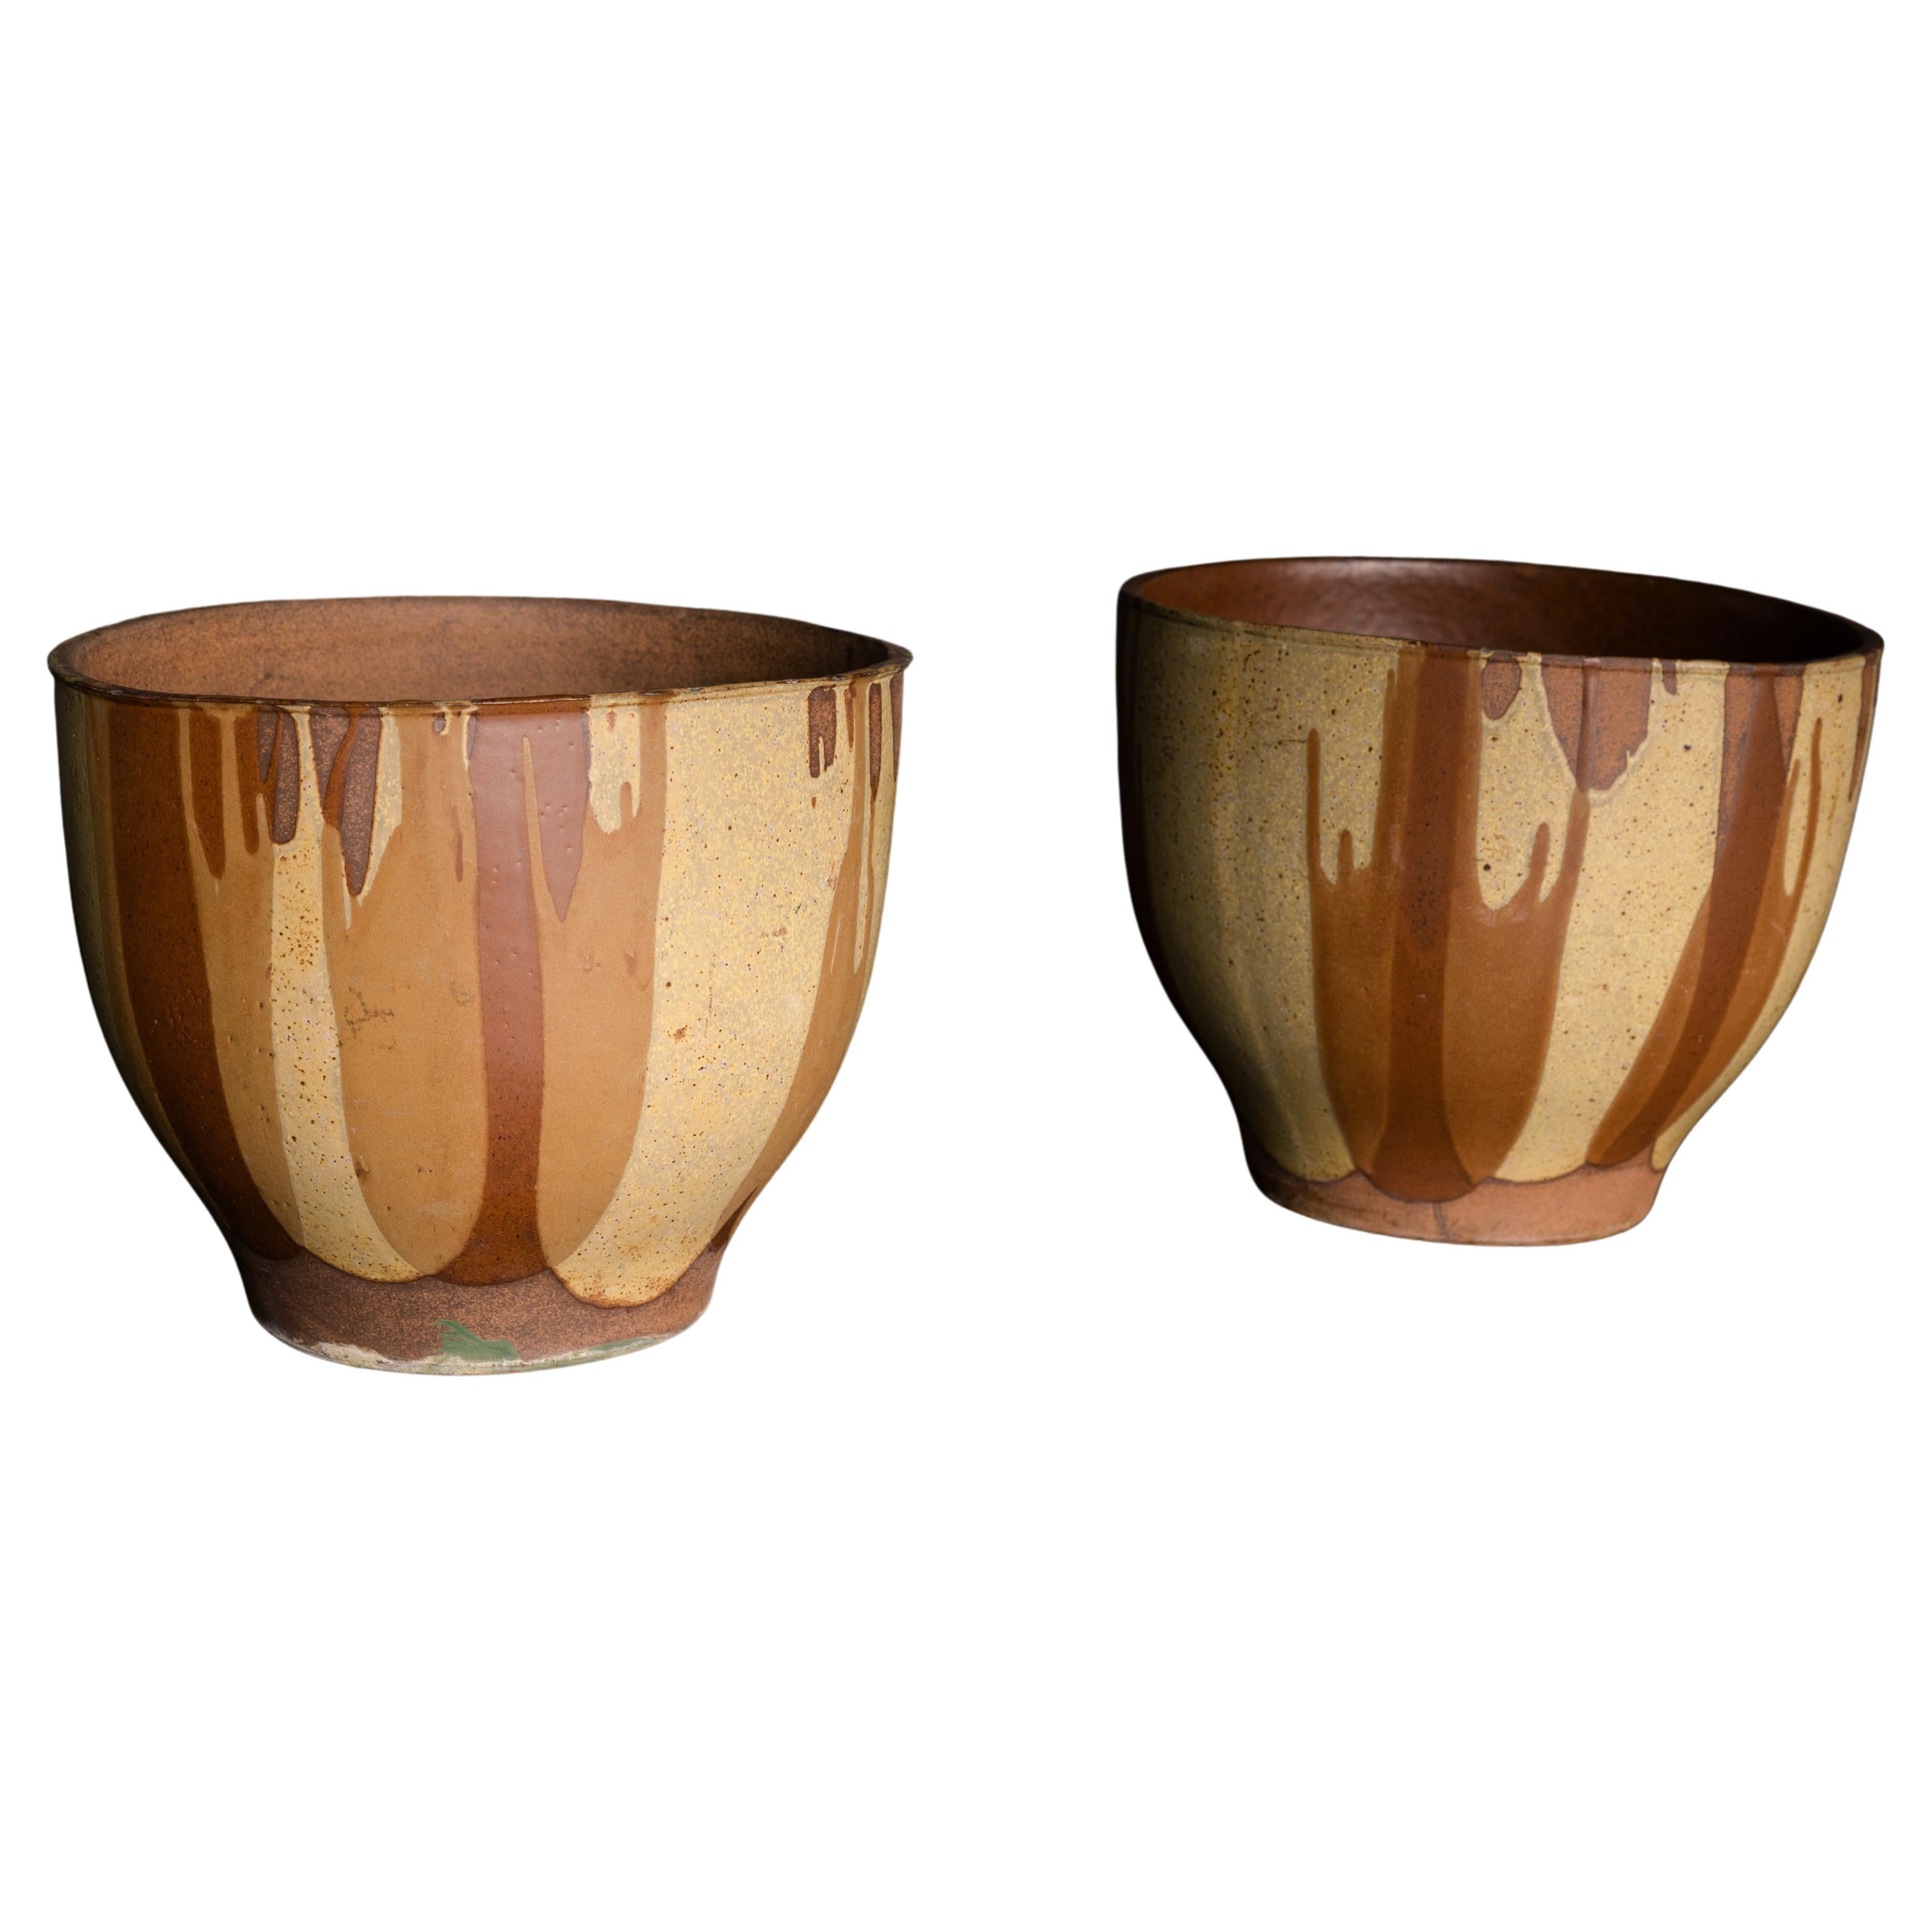 Model 5015 "Flame Glaze" Planter by David Cressey for AP For Sale